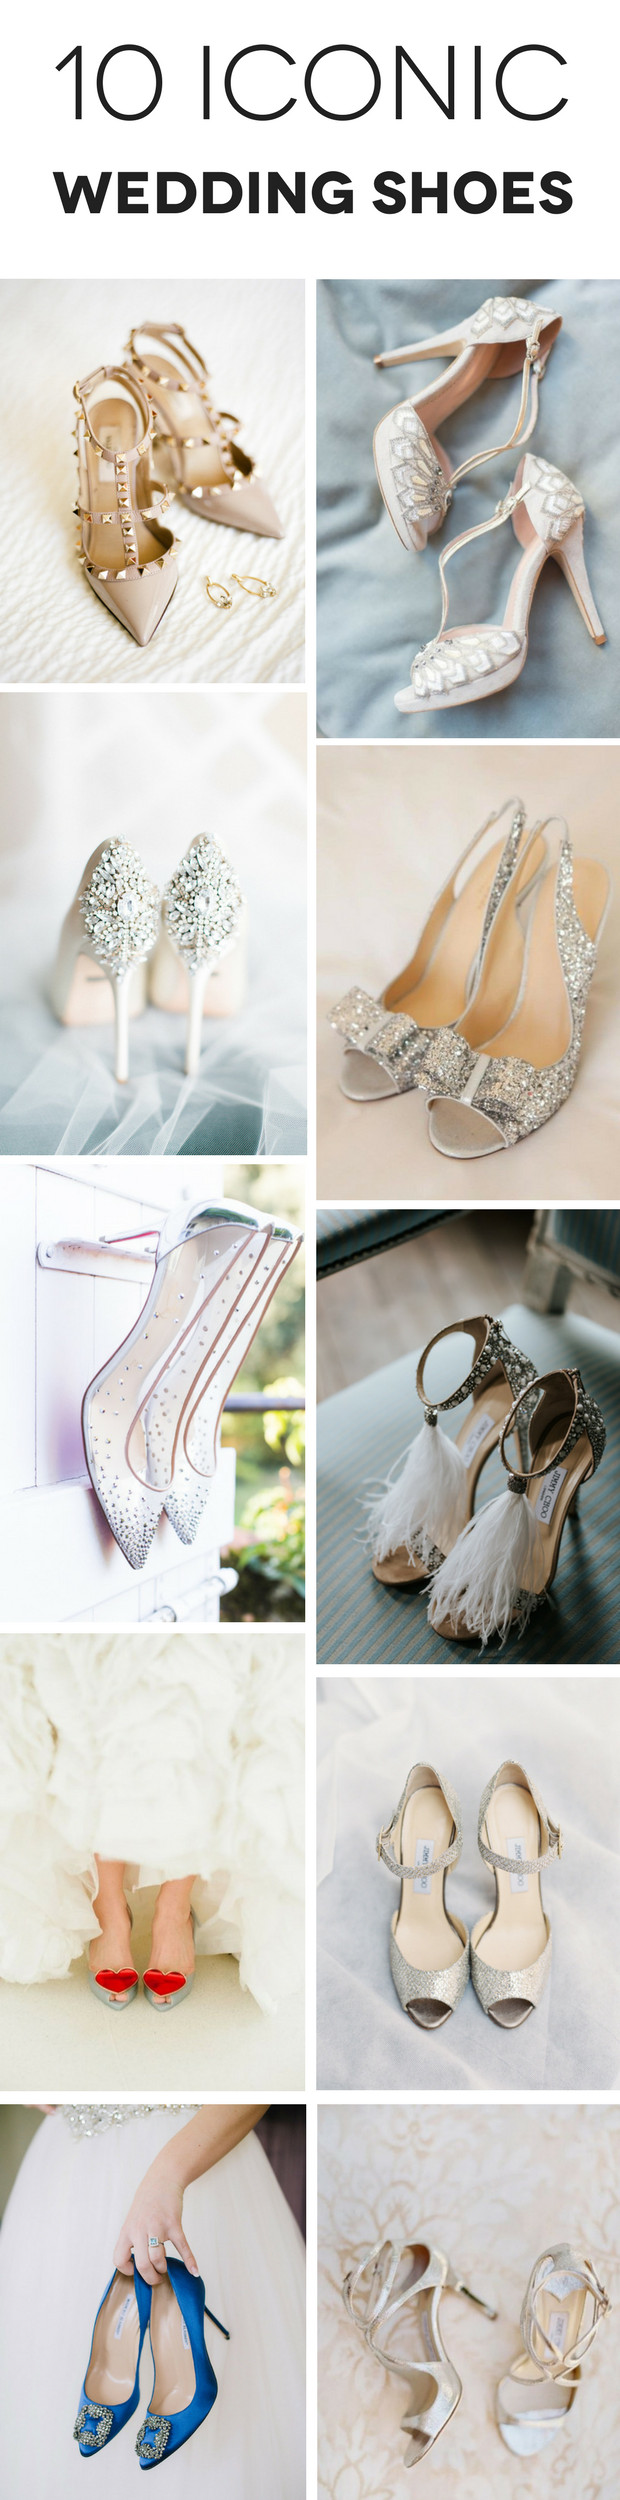 Popular Wedding Shoes
 Iconic Bridal Shoes The Top 10 Most Popular Wedding Shoes